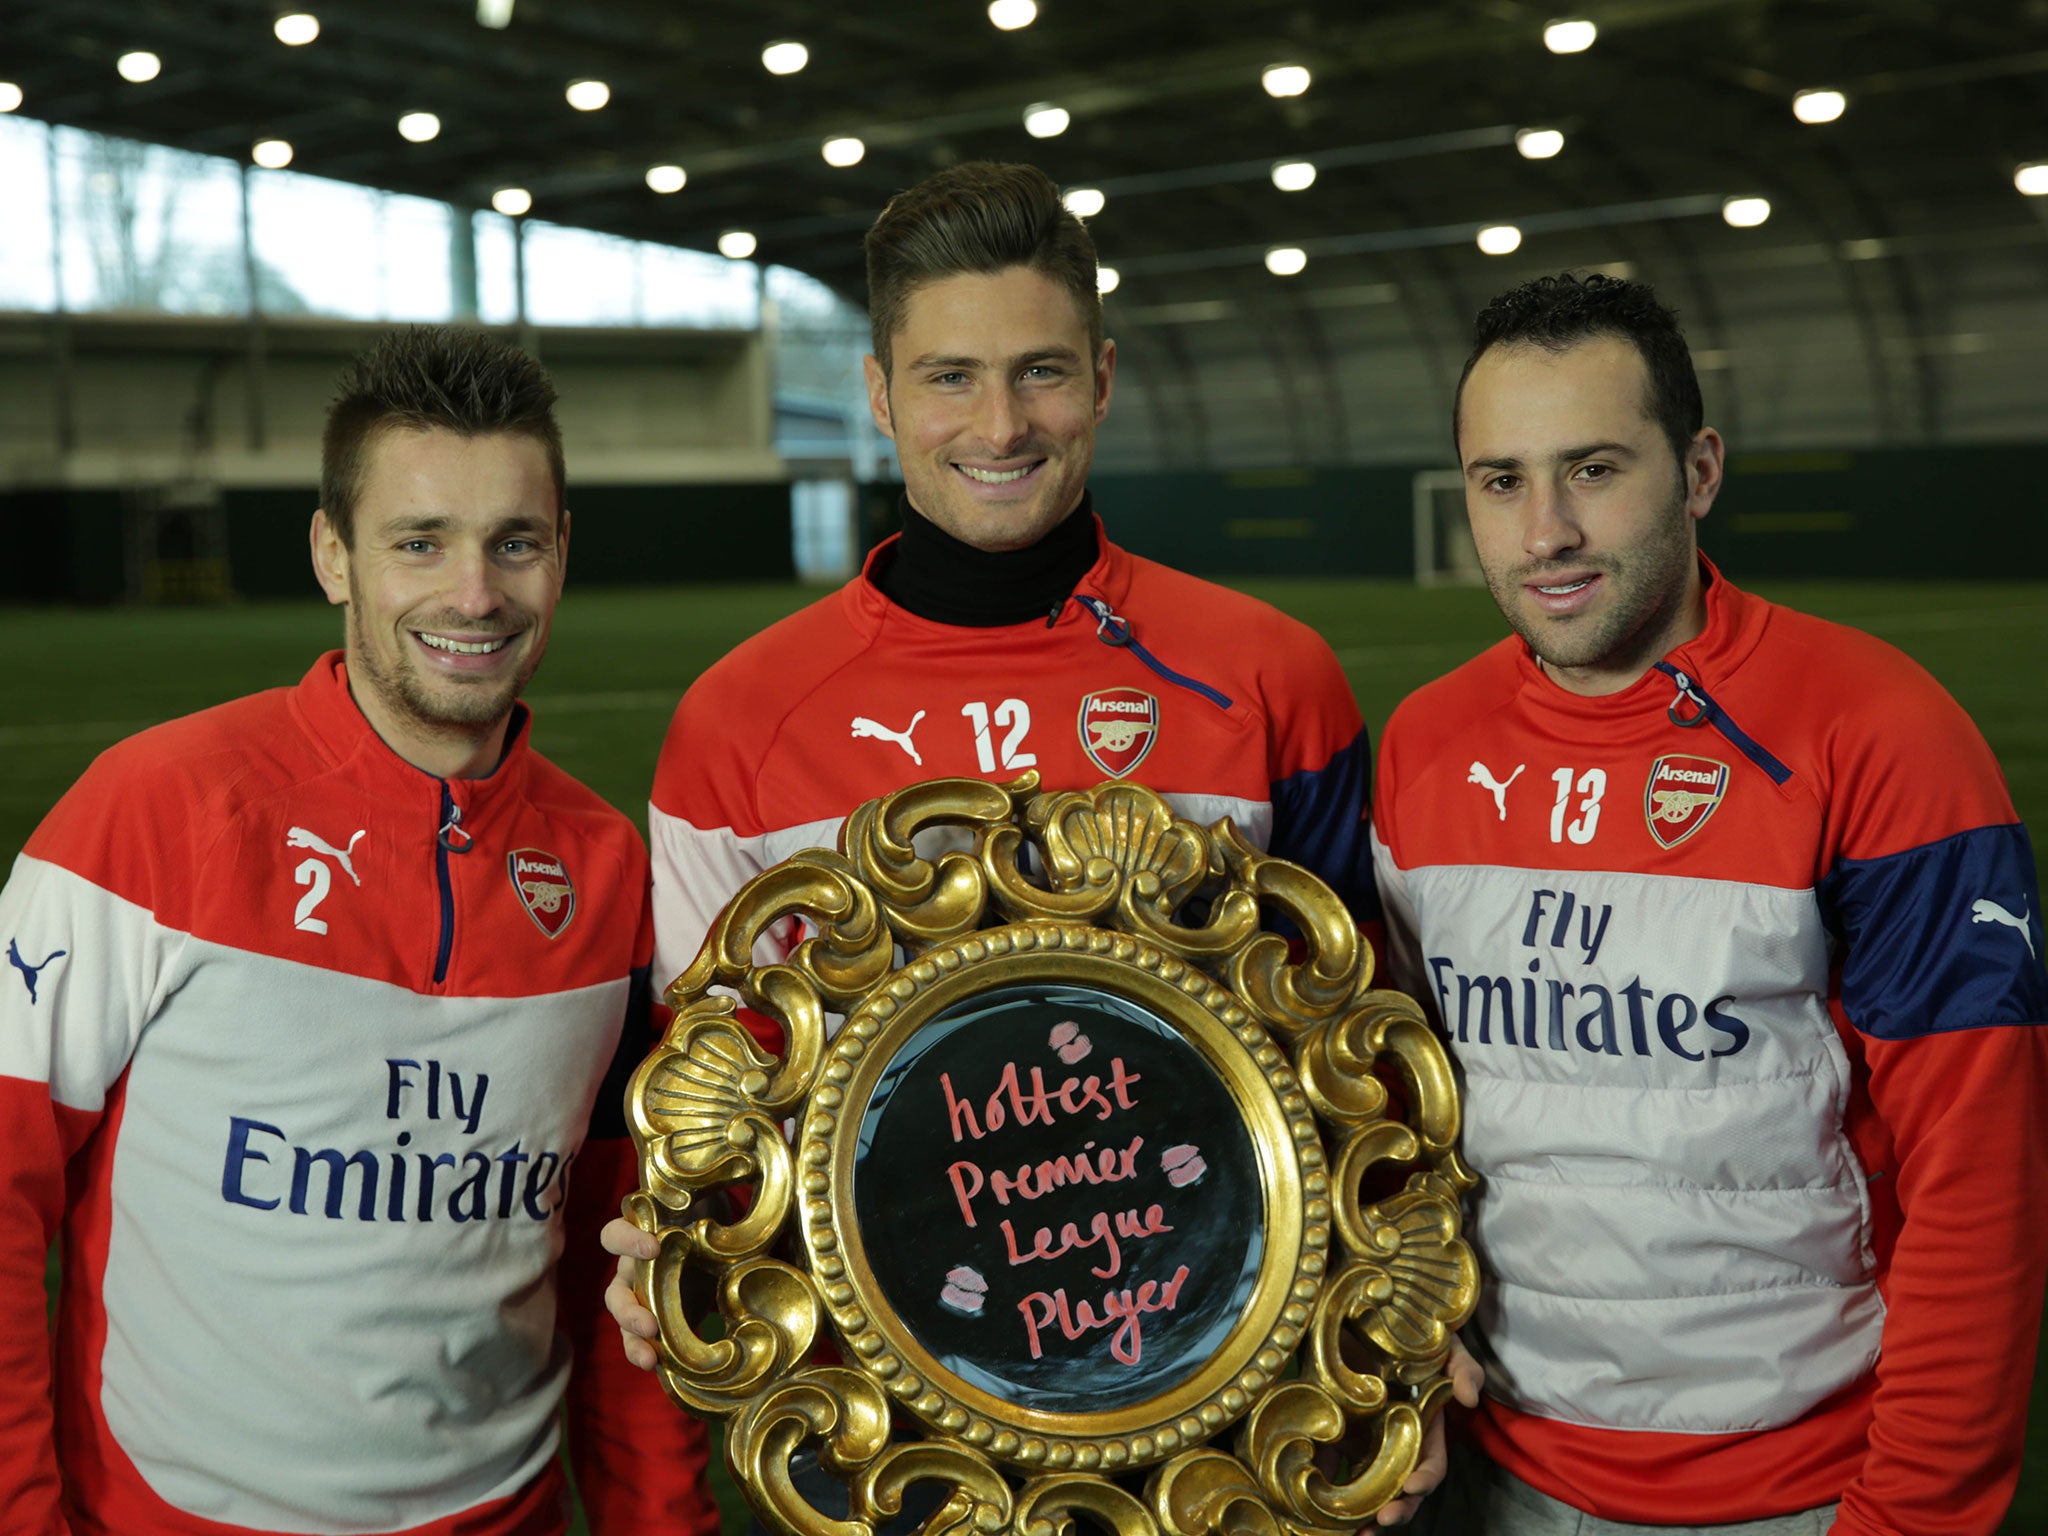 Olivier Giroud holds his trophy alongside team-mates Mathieu Debuchy (left) and David Ospina (right)